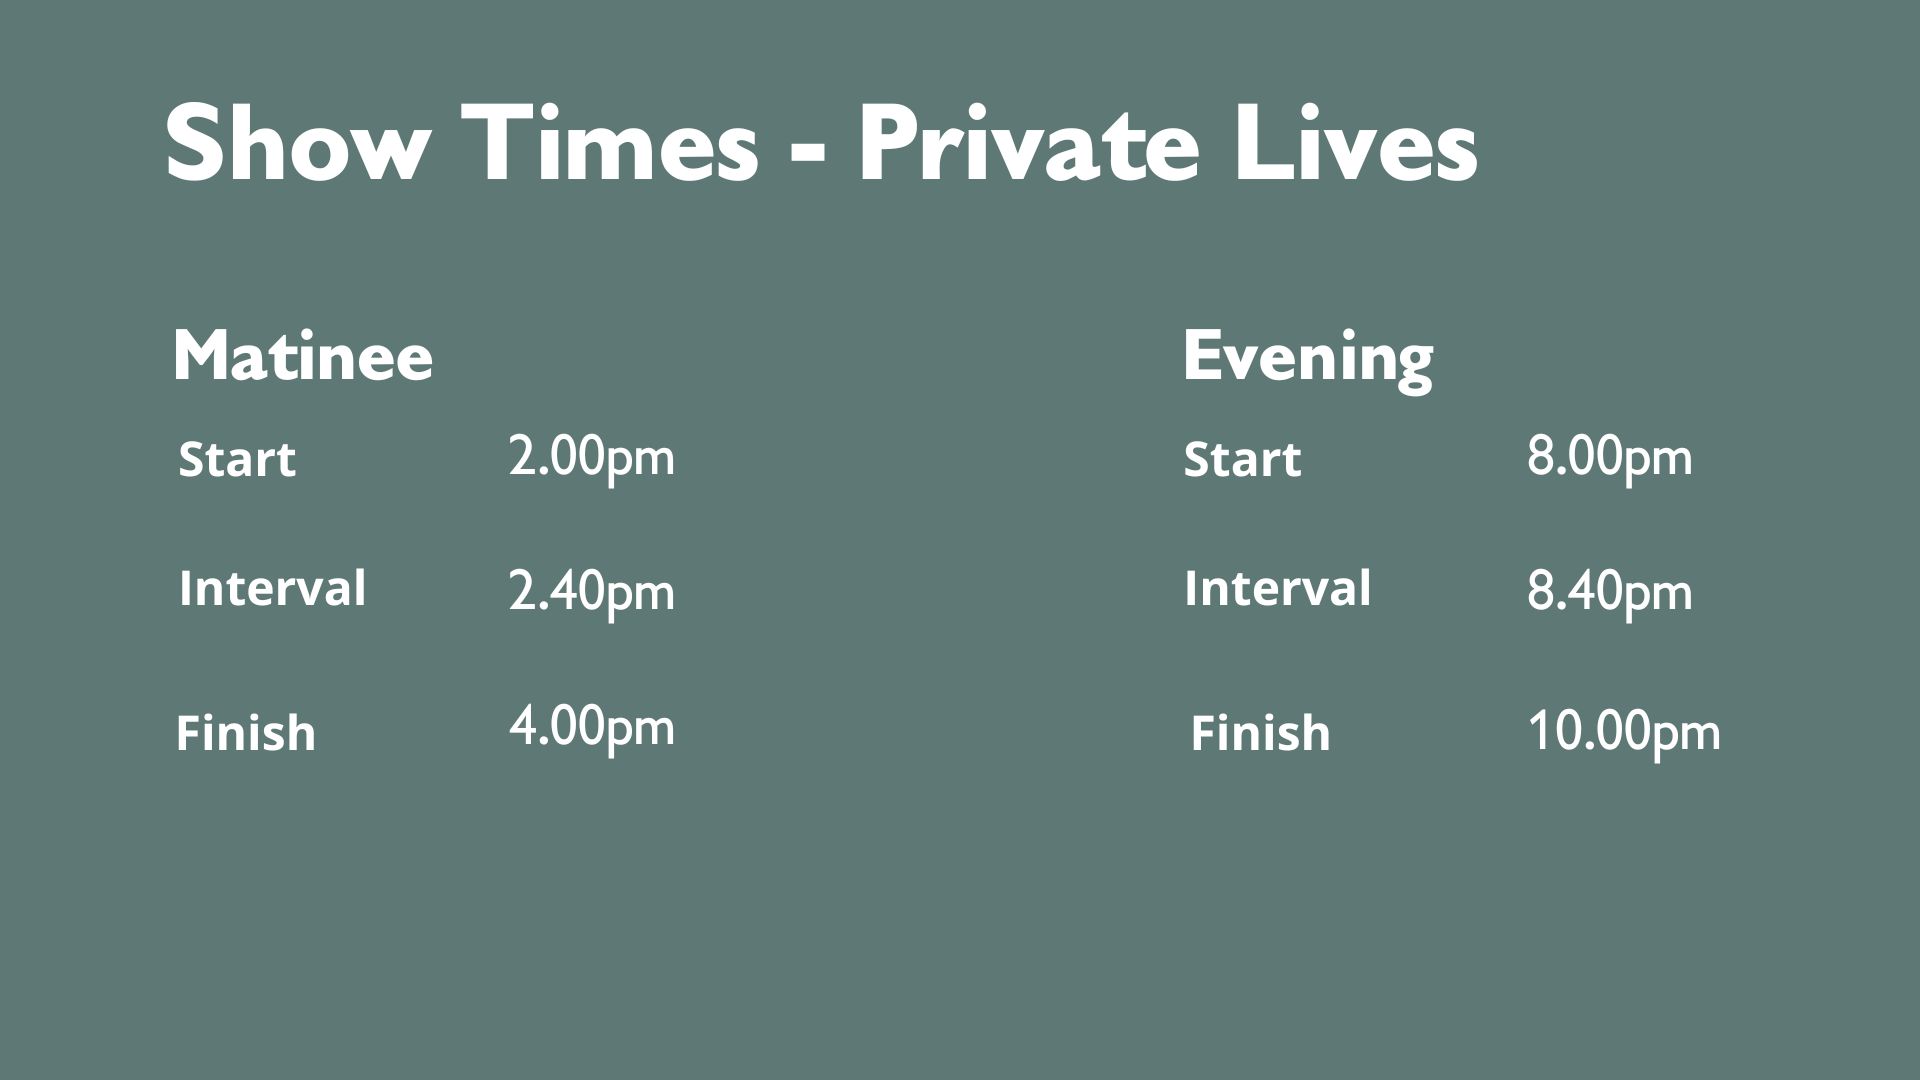 An image of a timings for both evening and matinee performances of the show 'Private Lives'.